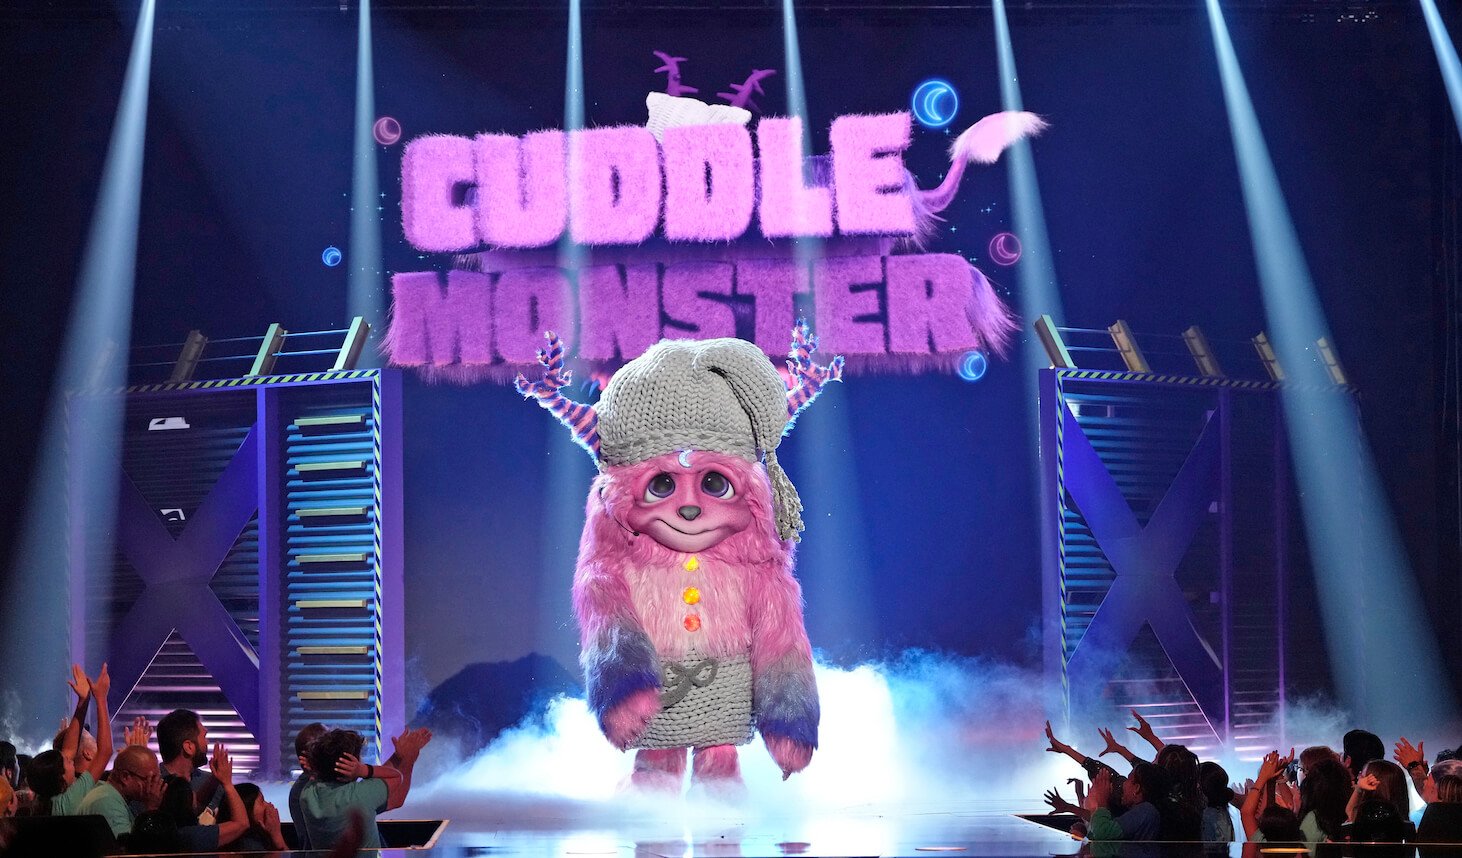 Cuddle Monster on stage in 'The Masked Singer' Season 10 with a 'Cuddle Monster' sign behind him